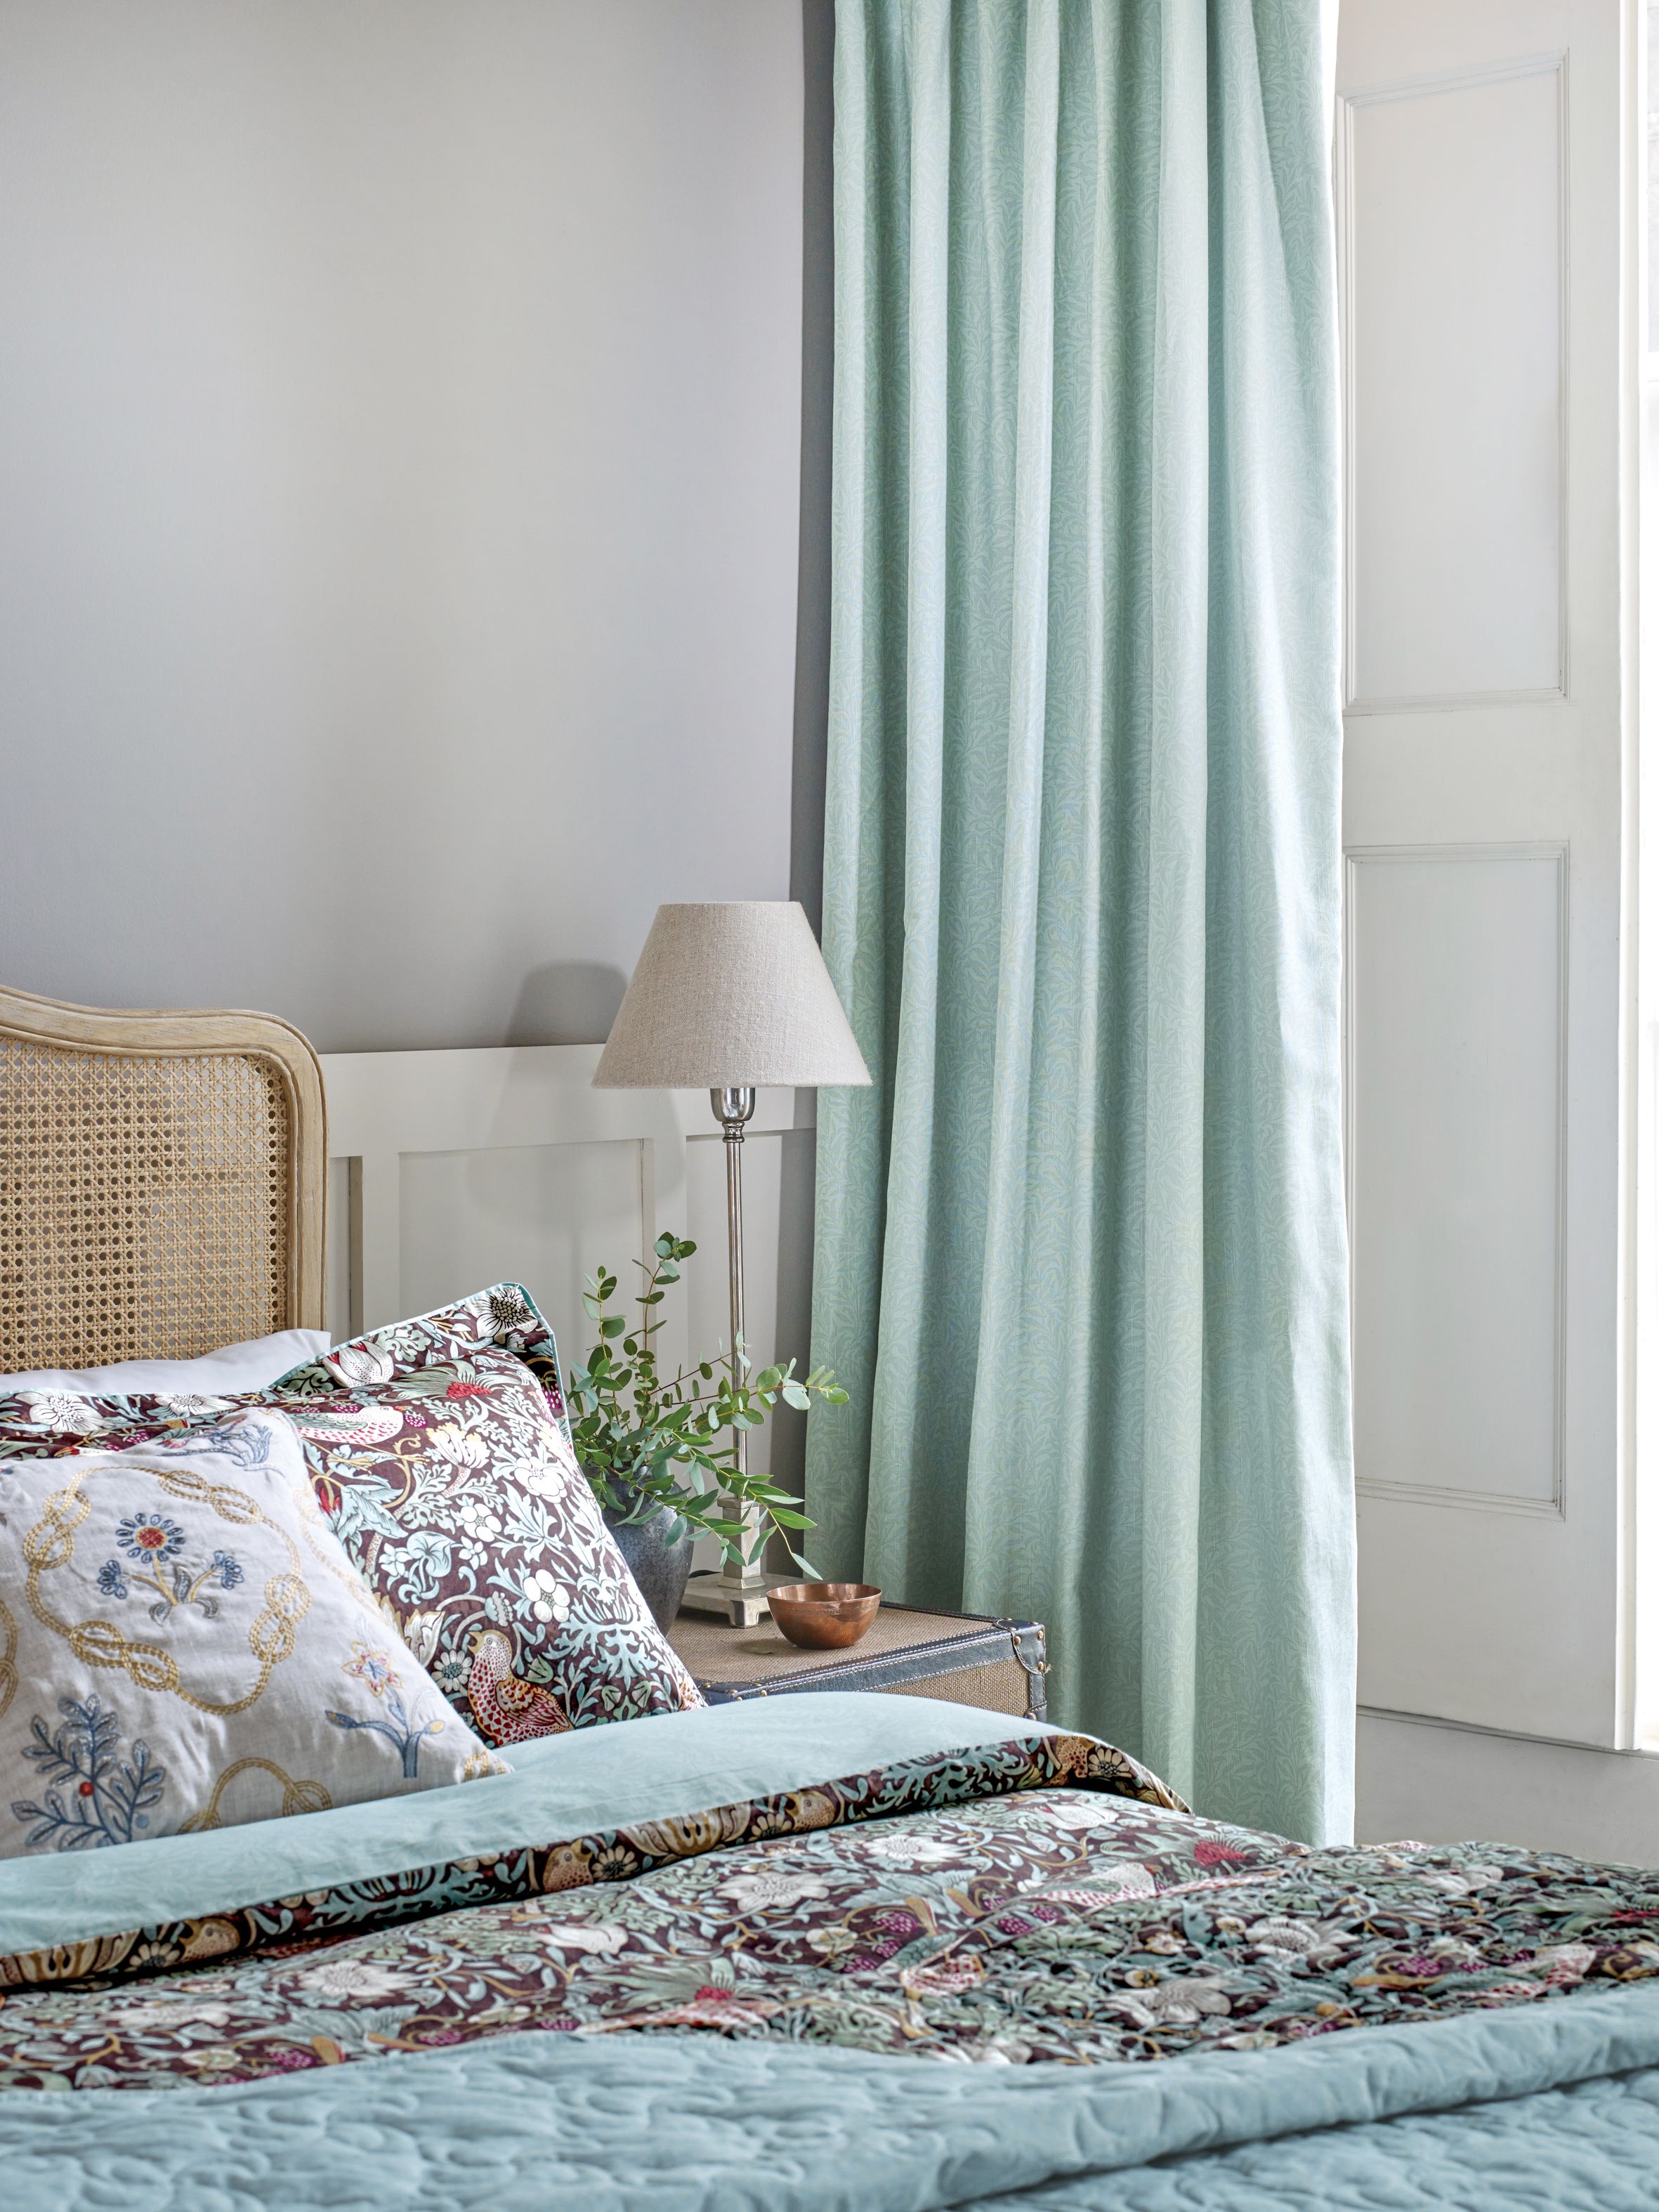 16 stylish bedroom curtain design ideas Real Homes